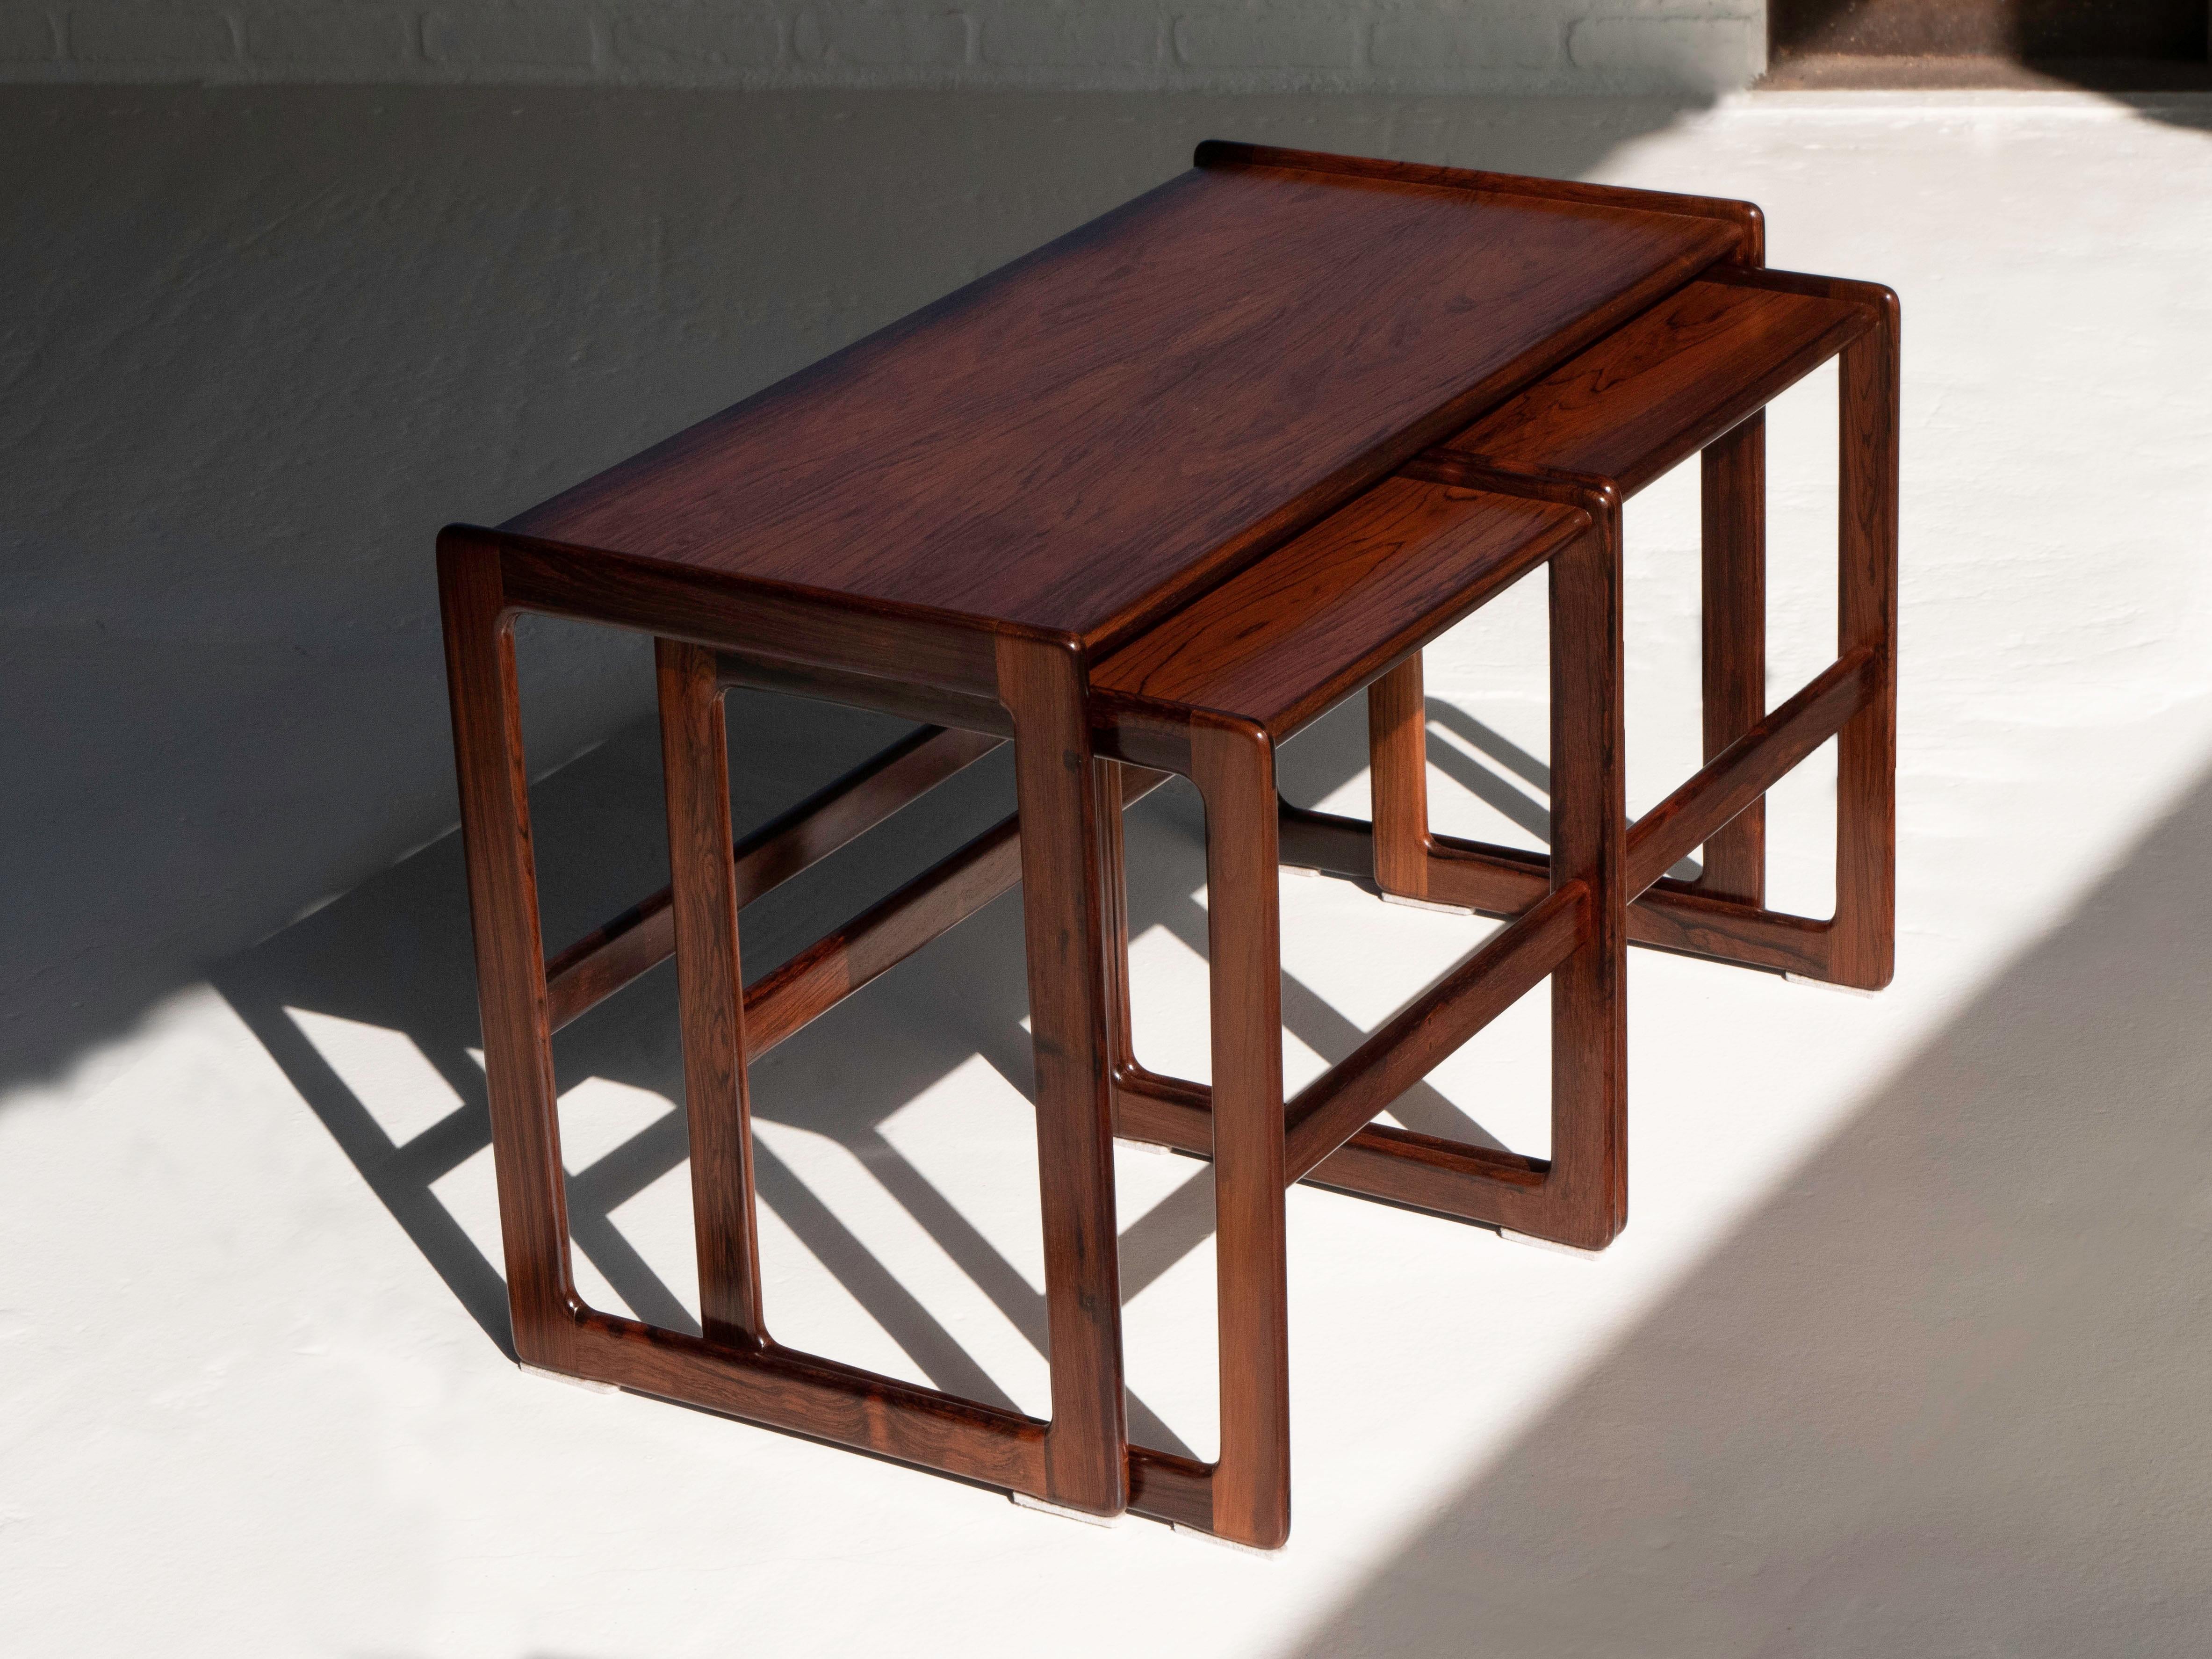 Set of 3 nesting tables in rosewood by designer Arne Hovmand-Olsen. Manufactured by Mogens Kold in Denmark. The tables have been refinished and are in excellent condition. All are structurally sound and have the makers marks